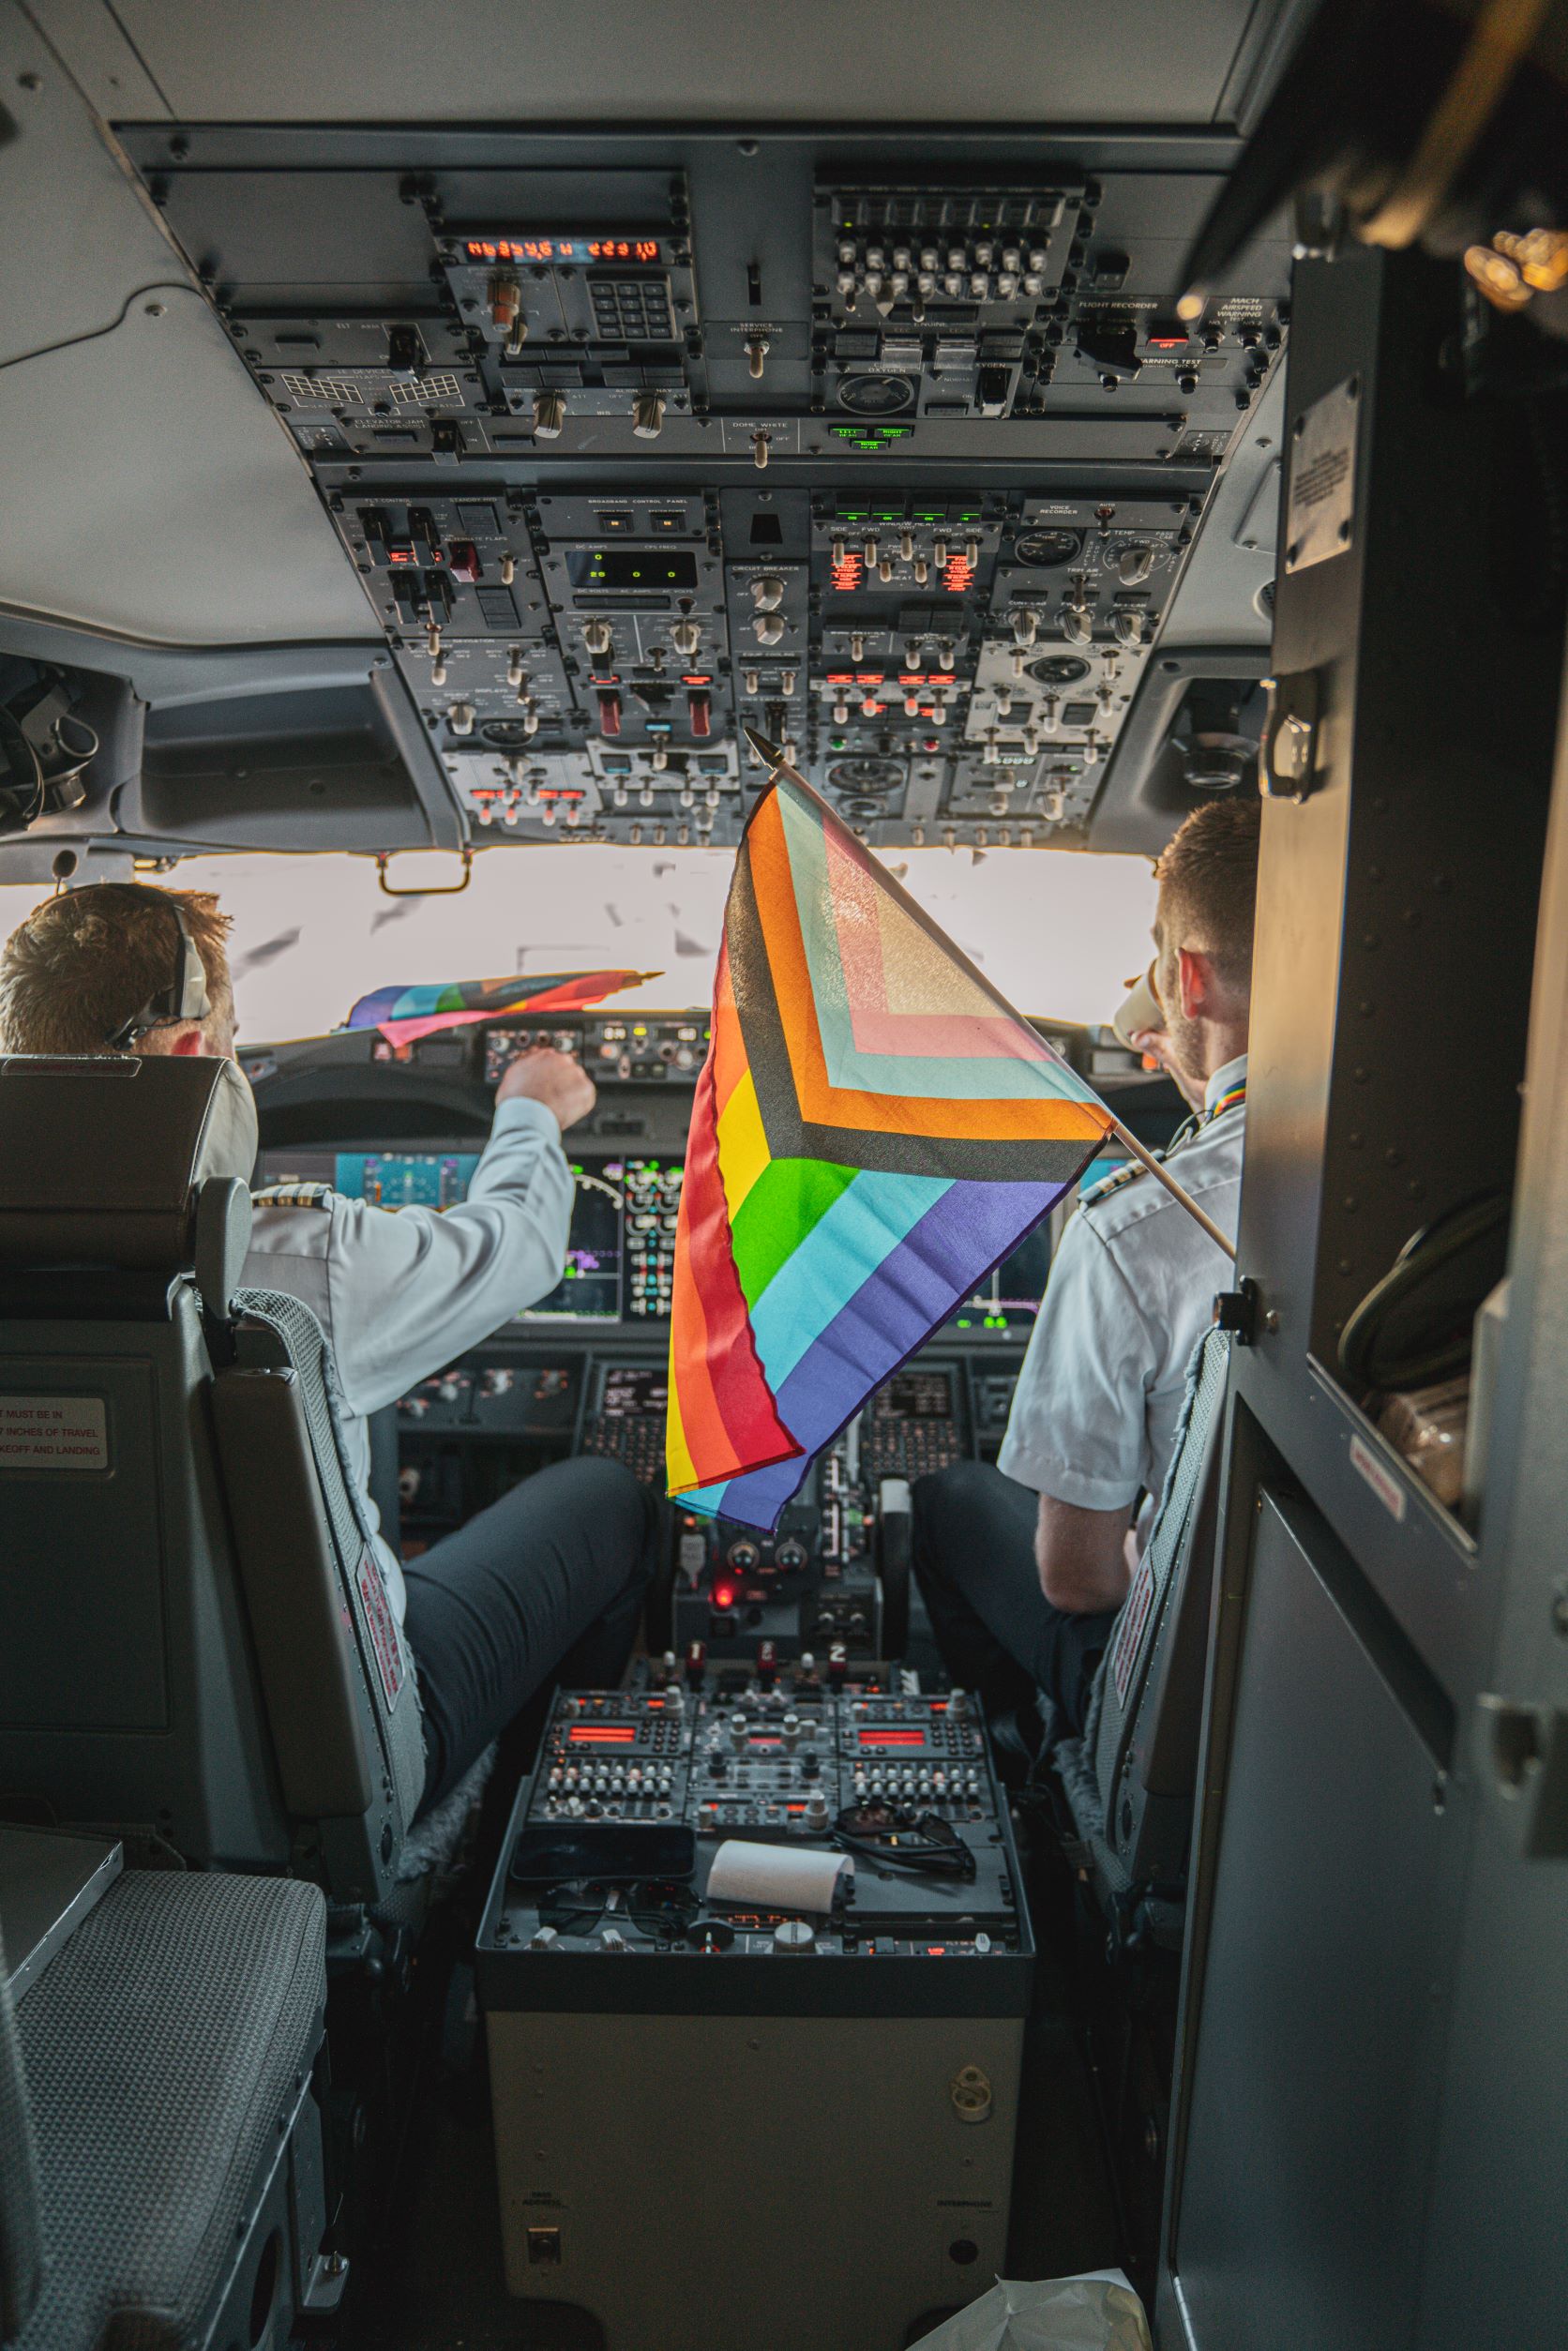 Icelandair Pride flight: cockpit view of 2 pilots, with rainbow flag flying in foreground